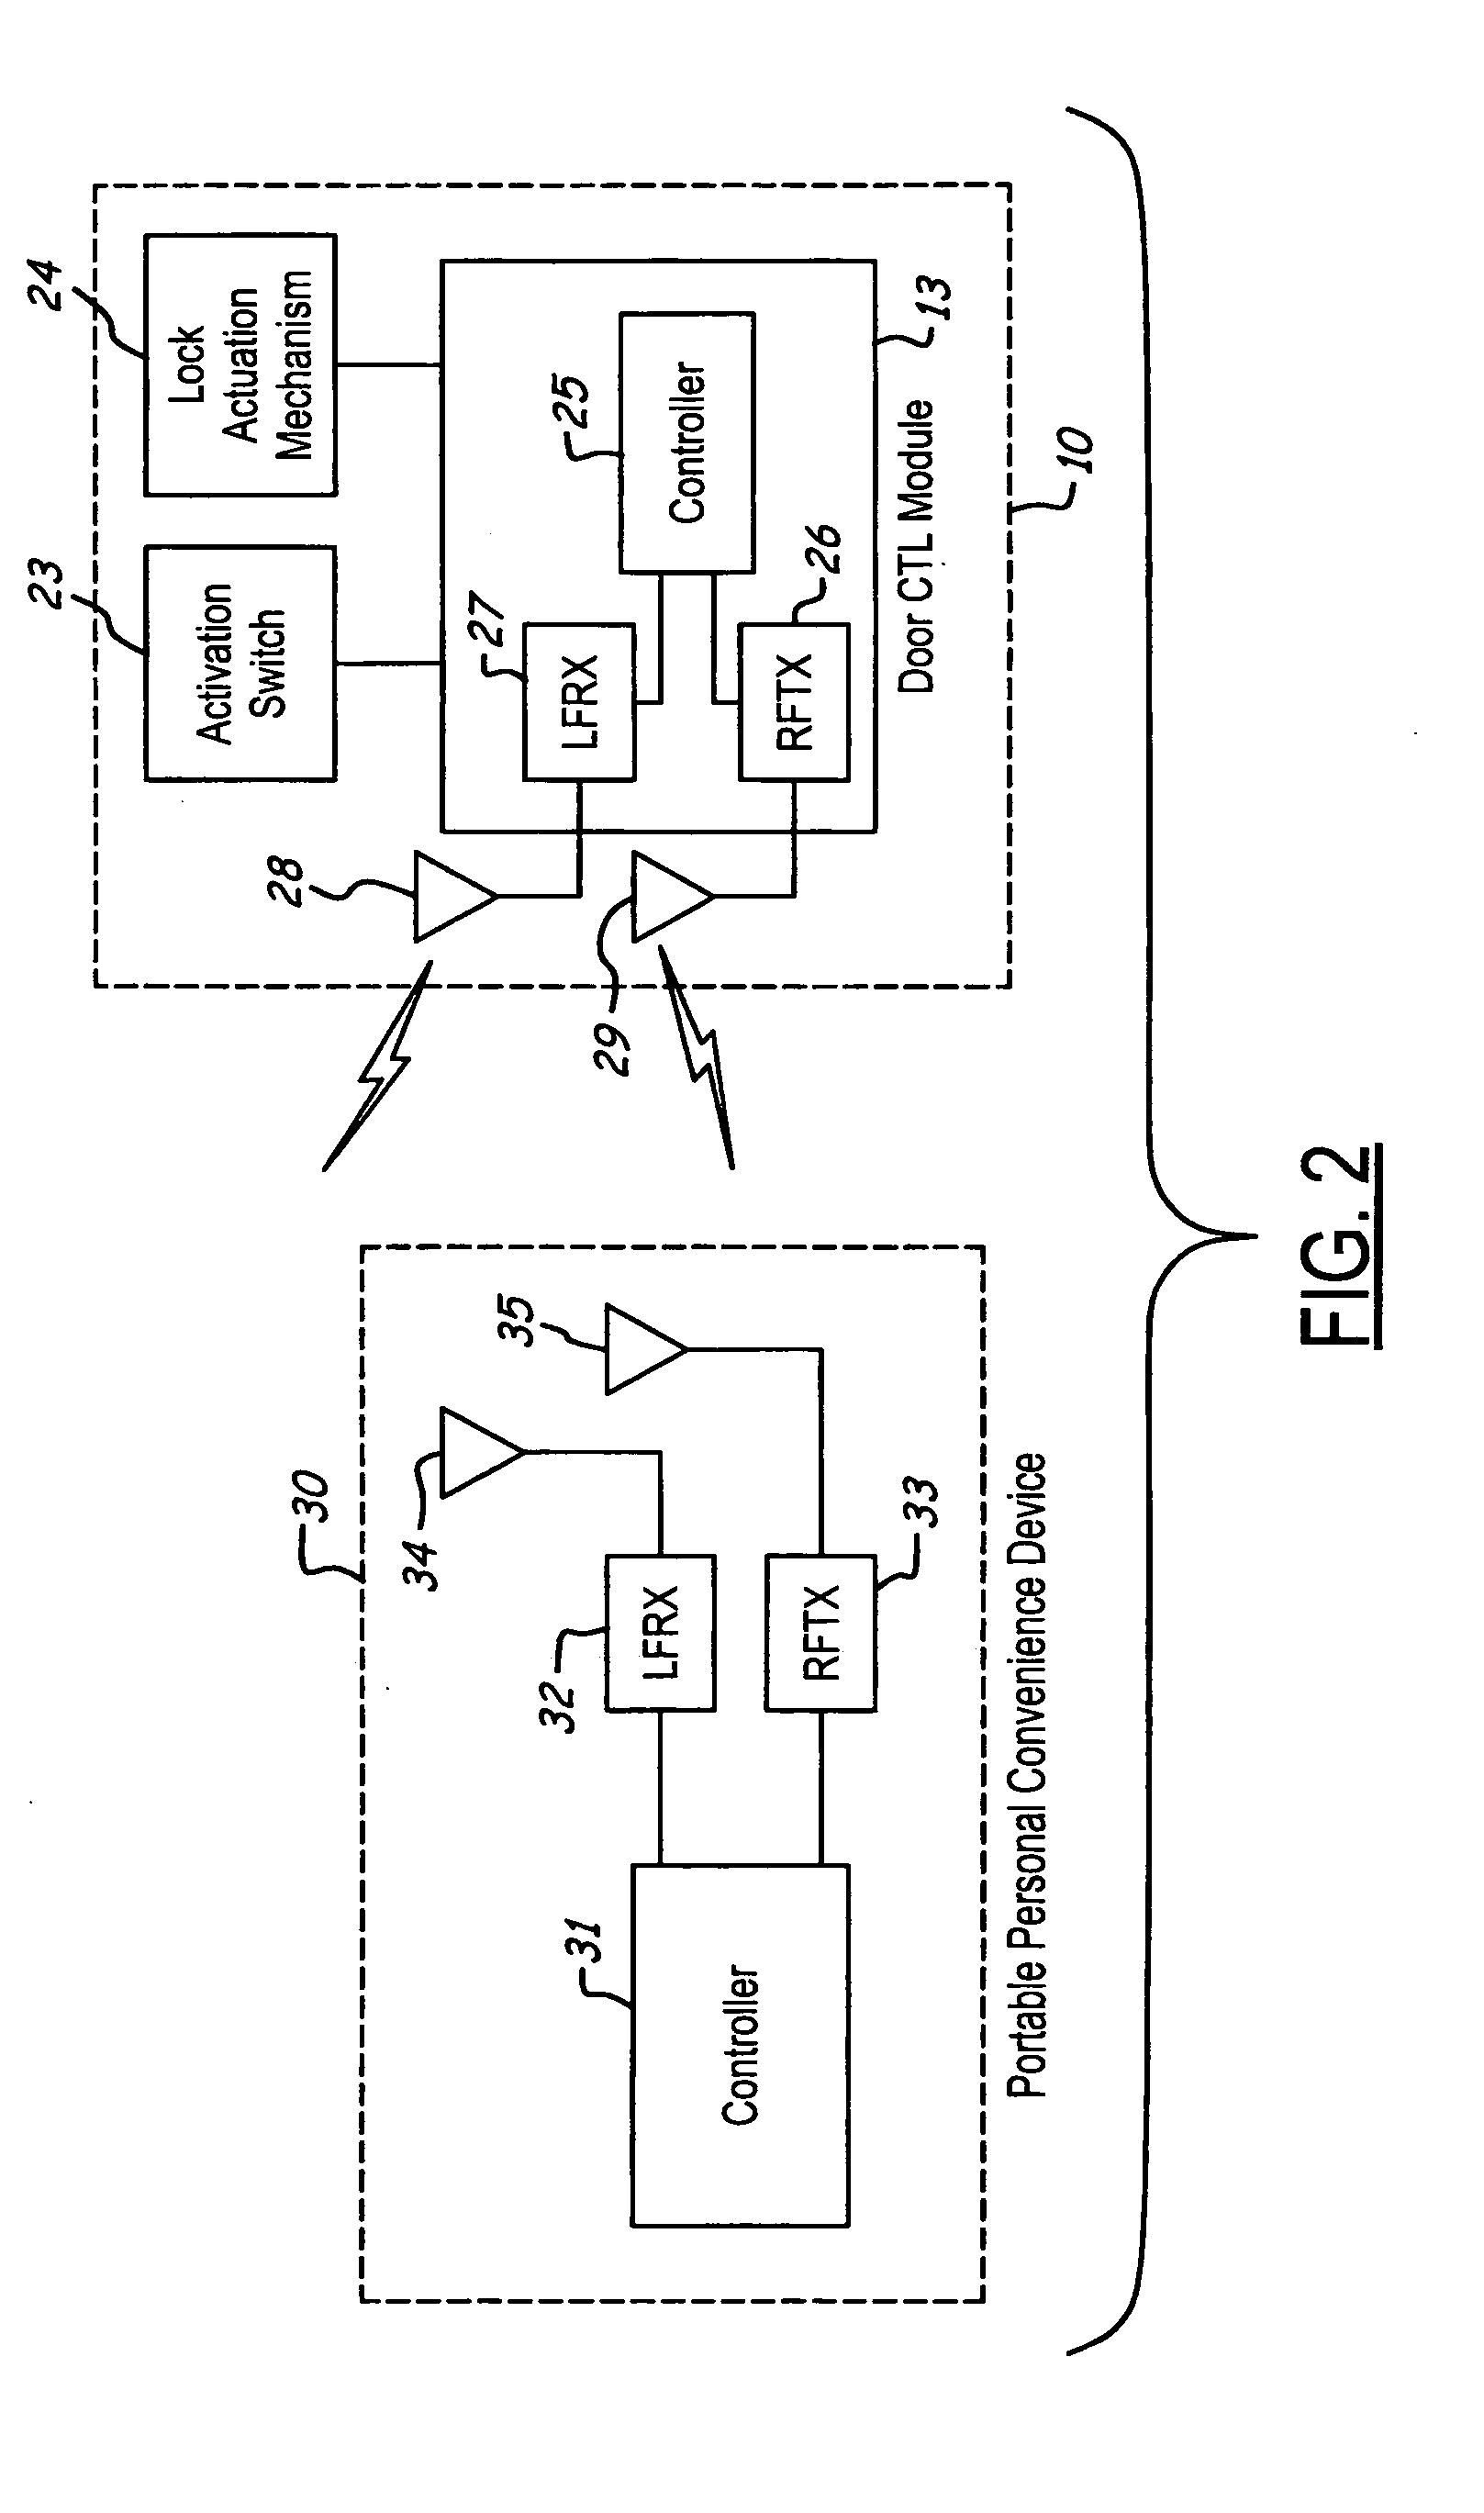 Integrated passive entry transmitter/receiver